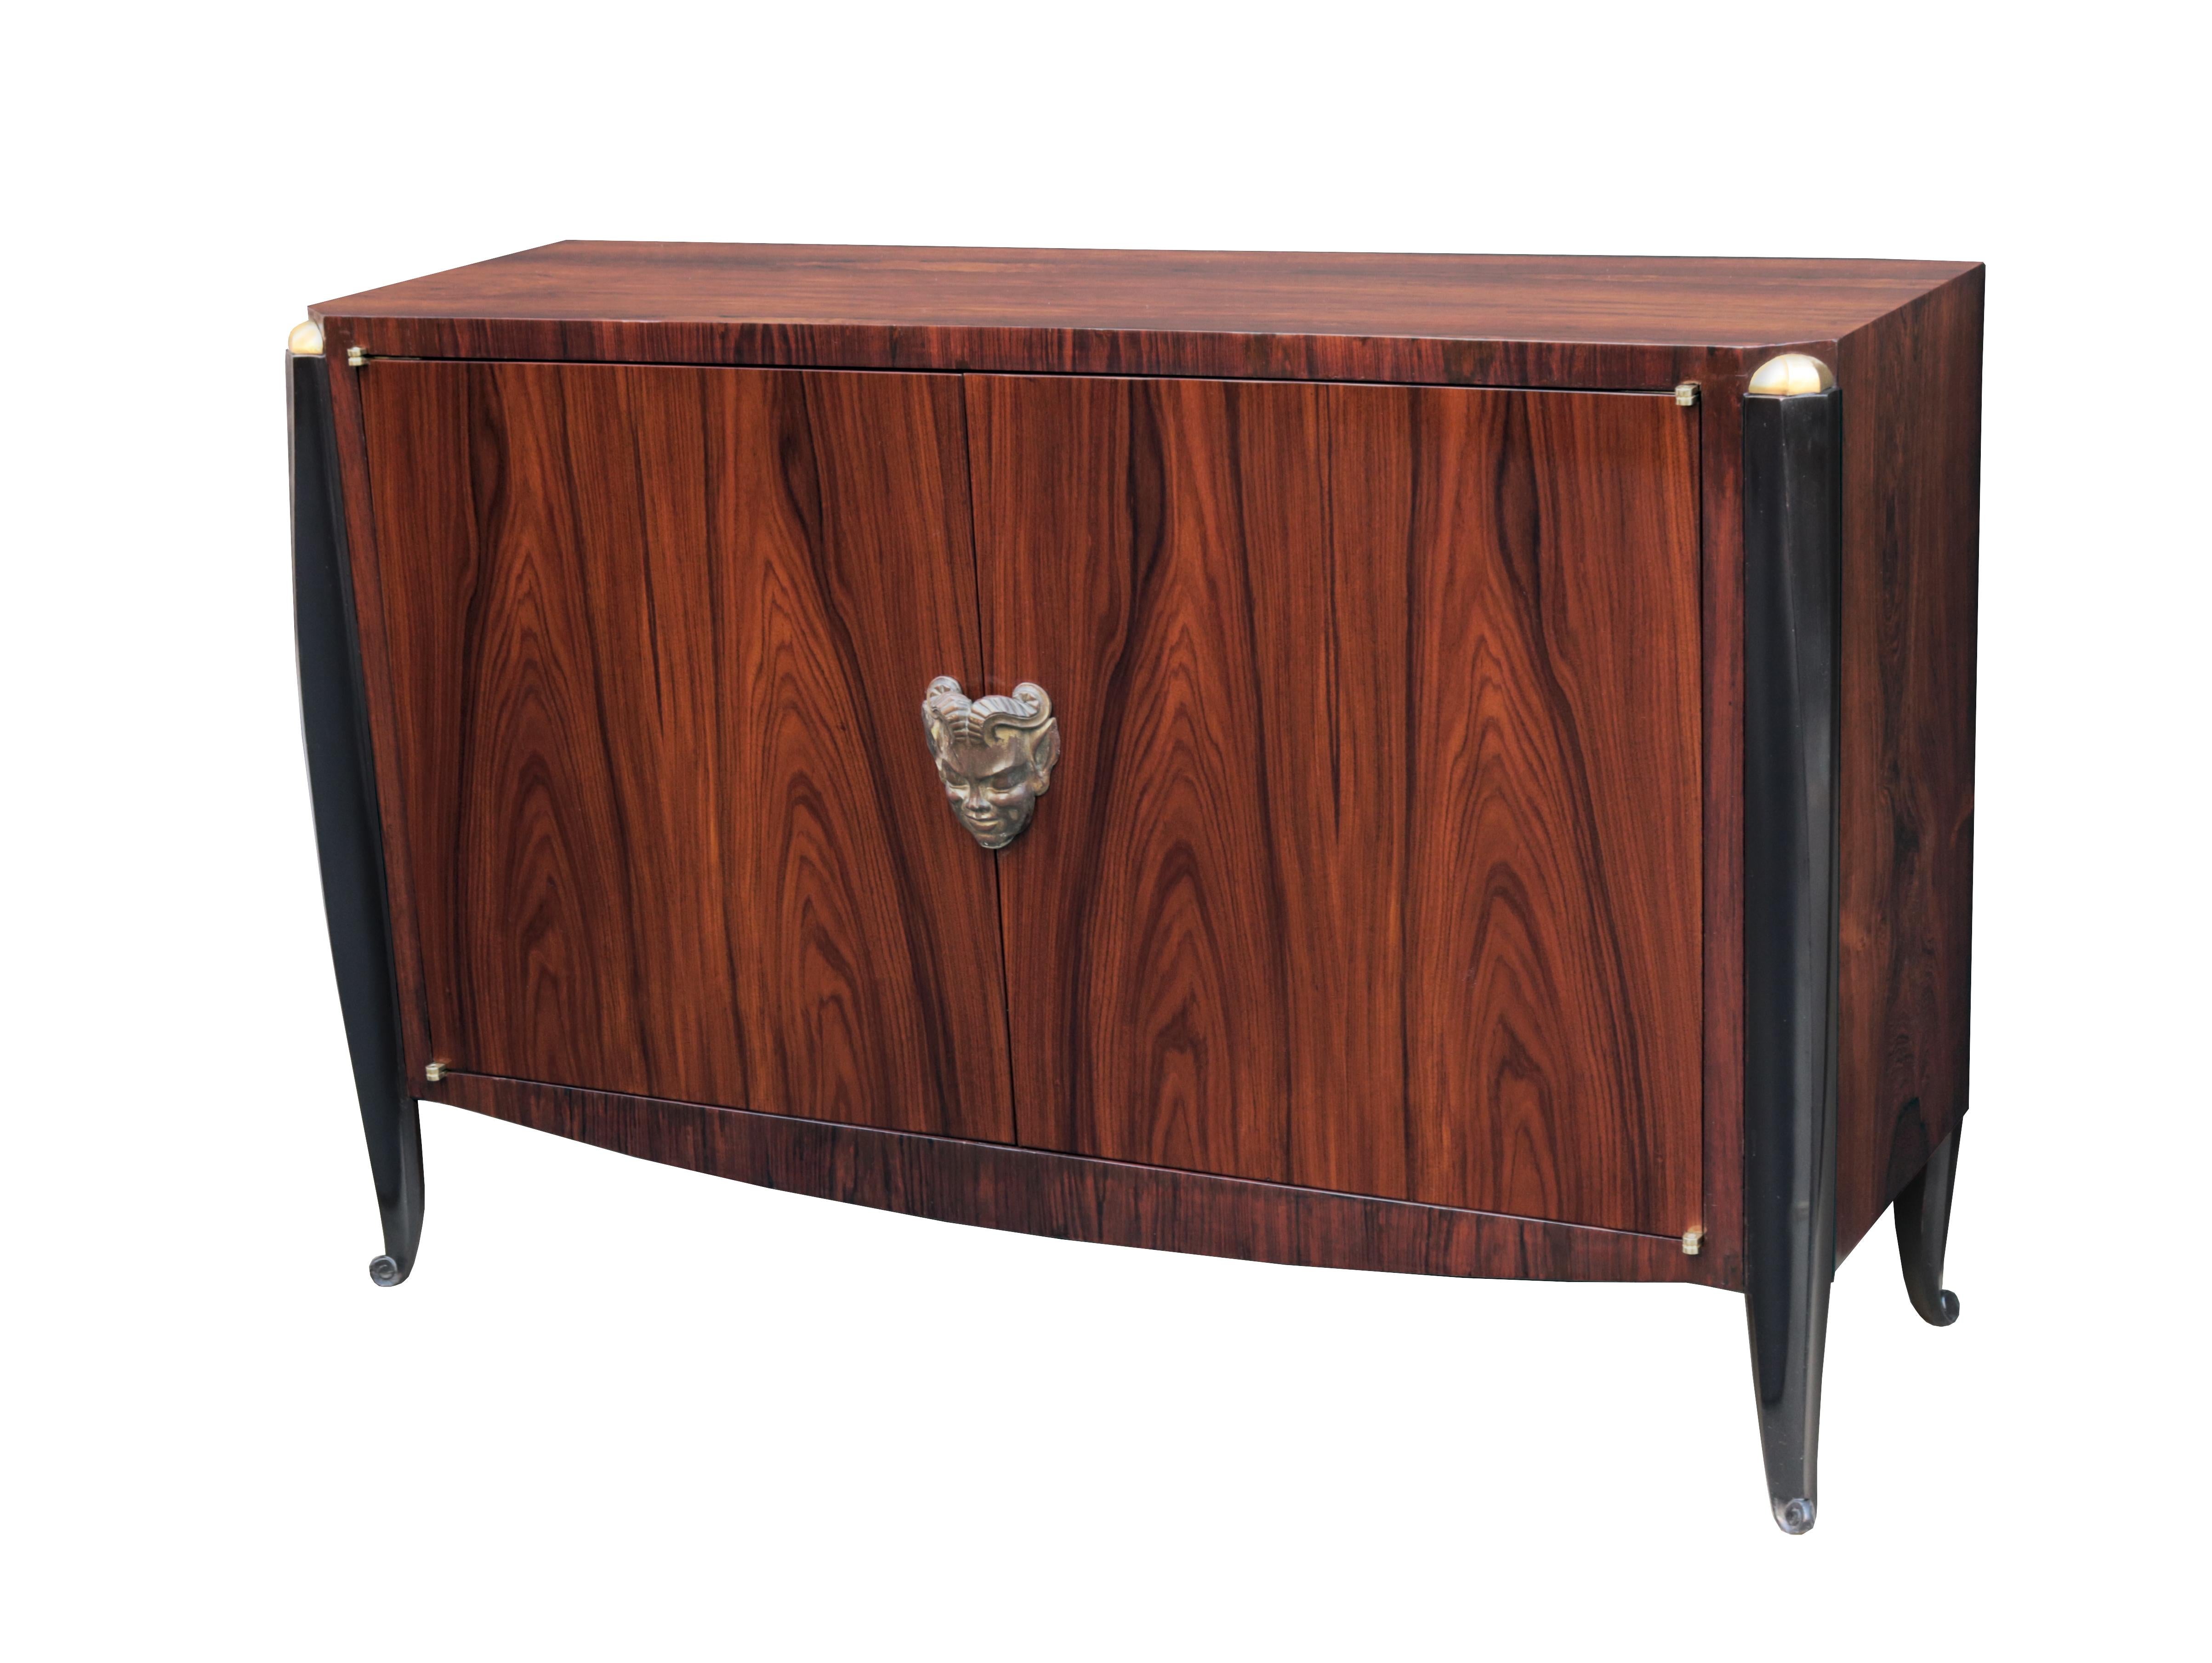 An Art Deco two door cabinet attributed to Jean Pascaud.
Rosewood with ebonized legs, giltwood details, central carved giltwood face detail.